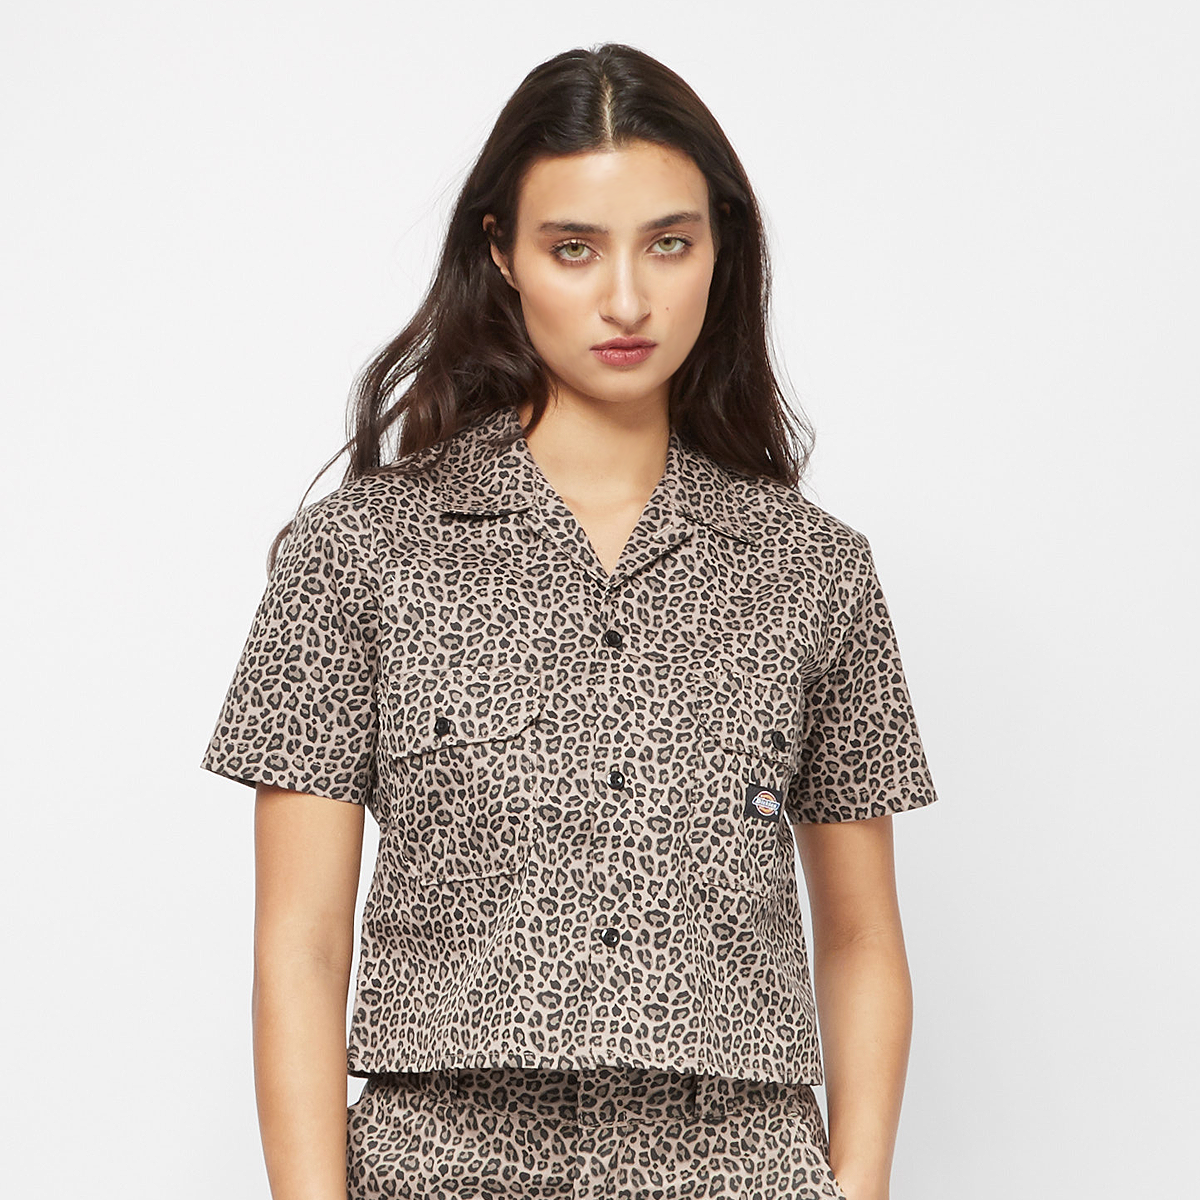 Productafbeelding: Silver Firs Shirt Short Sleeve W